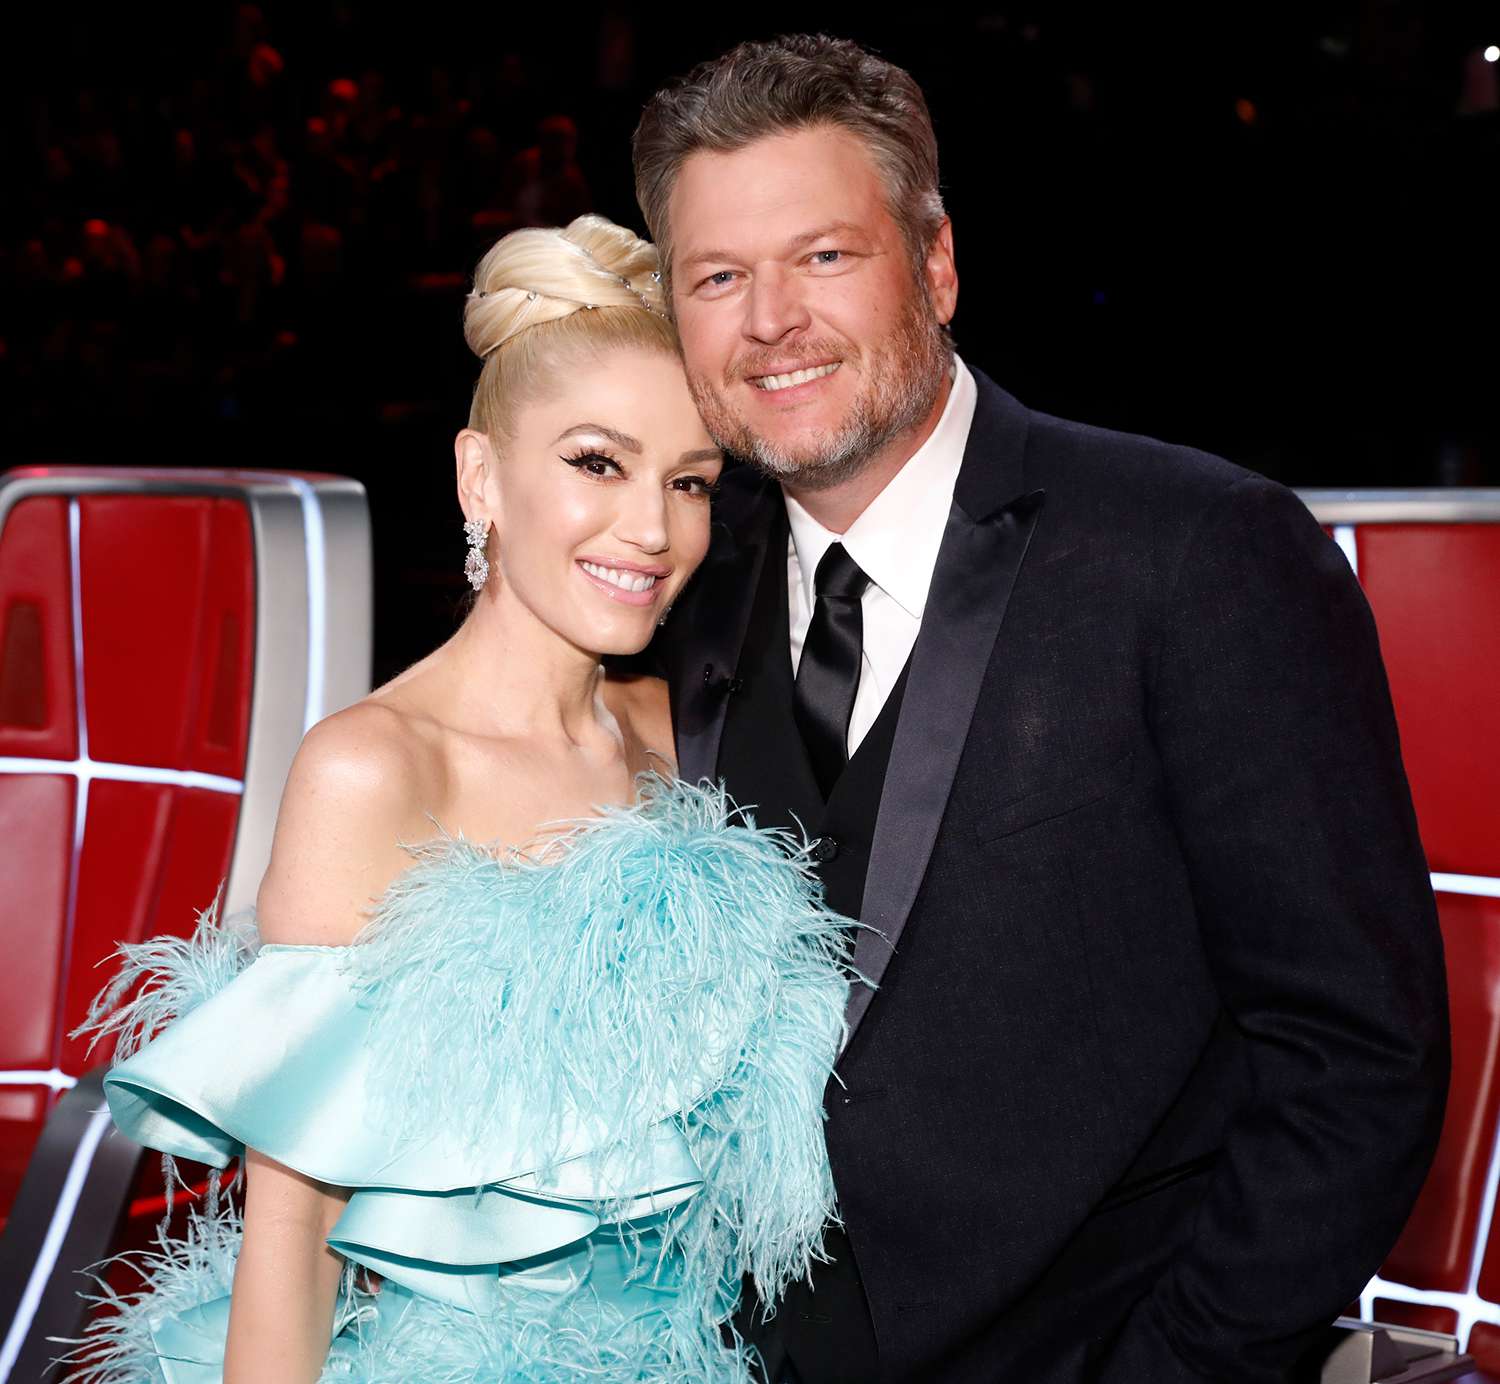 Blake Shelton sends a cute video about meeting his wife Gwen Stefani at work